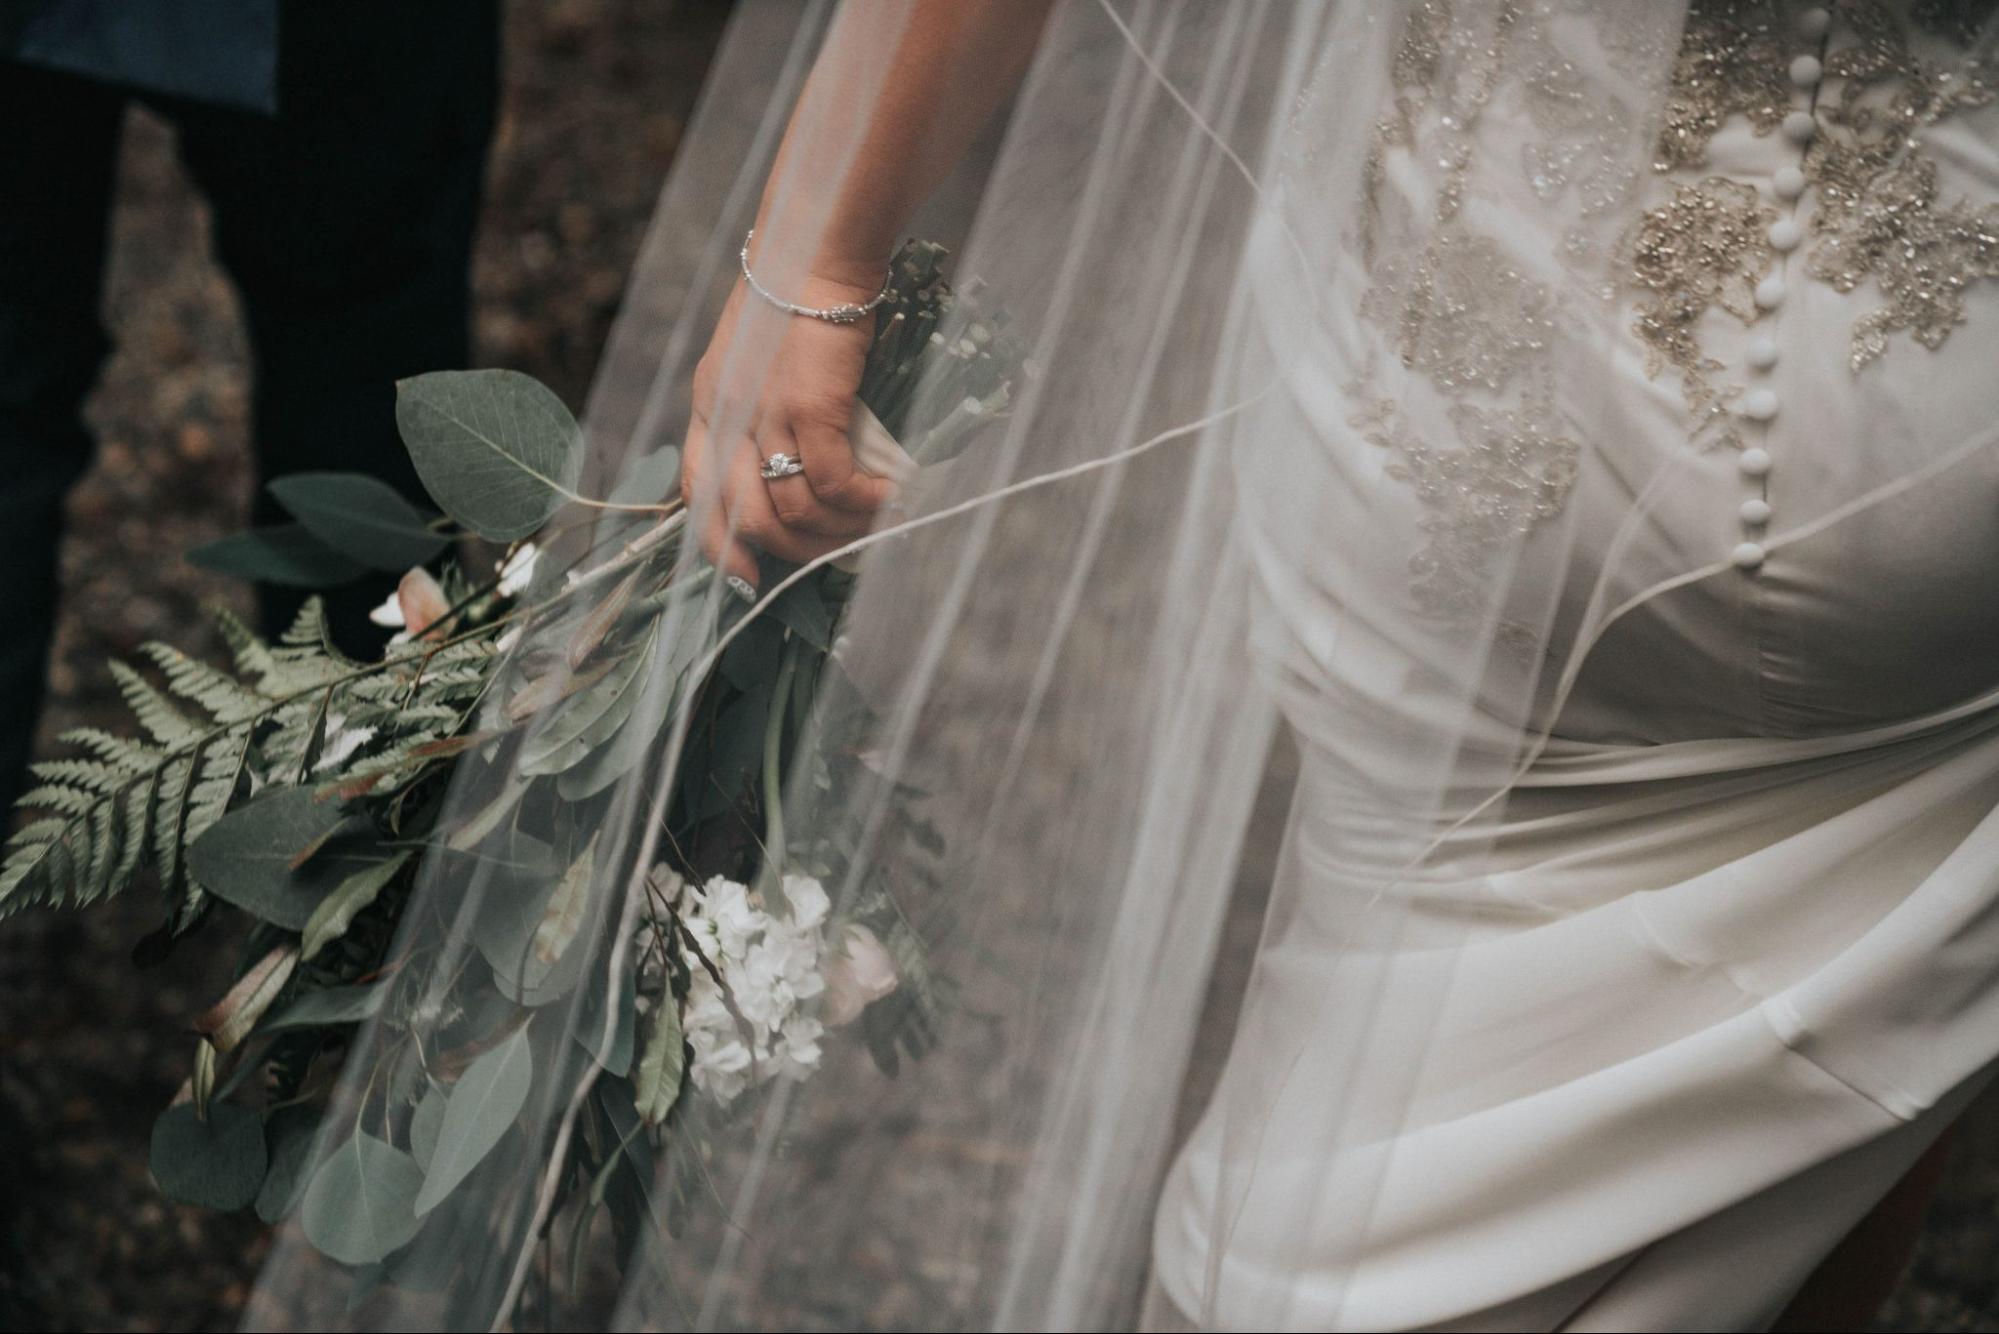 A bride walks away with her bouquet, wearing a solitaire ring and diamond band.